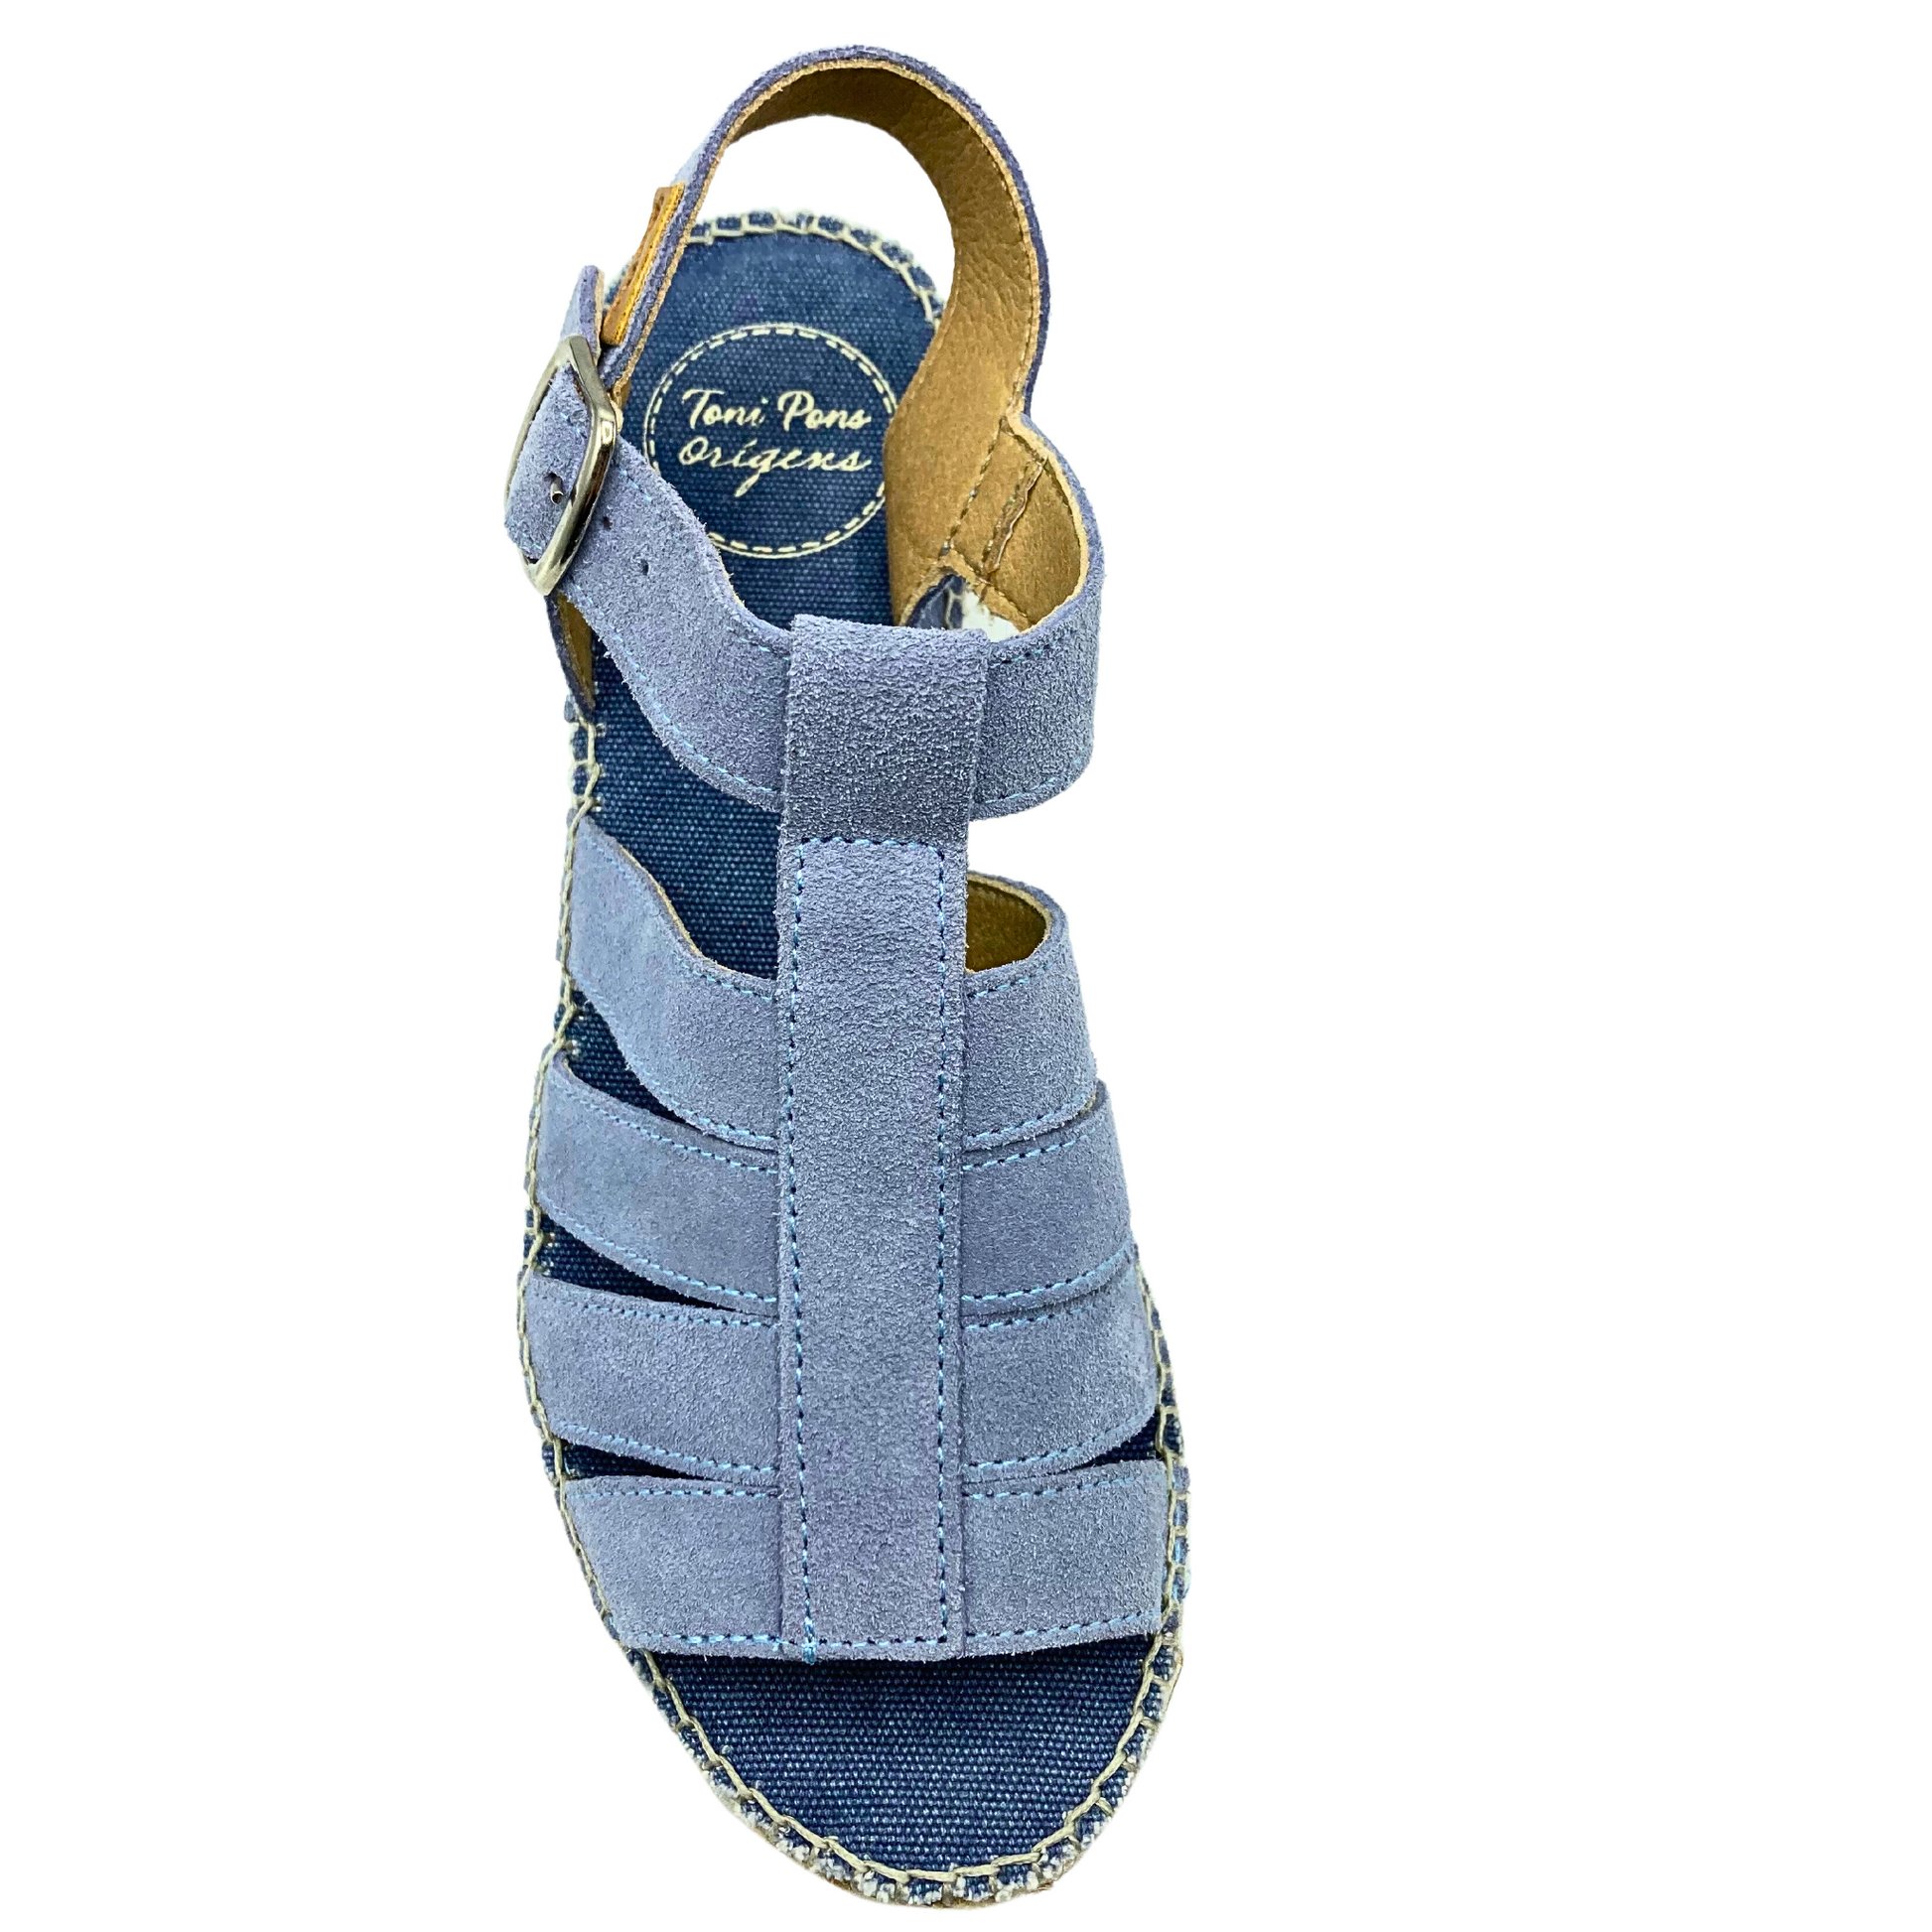 Top down view of a soft blue leather sandal.  Fisherman sandal with an open toe.